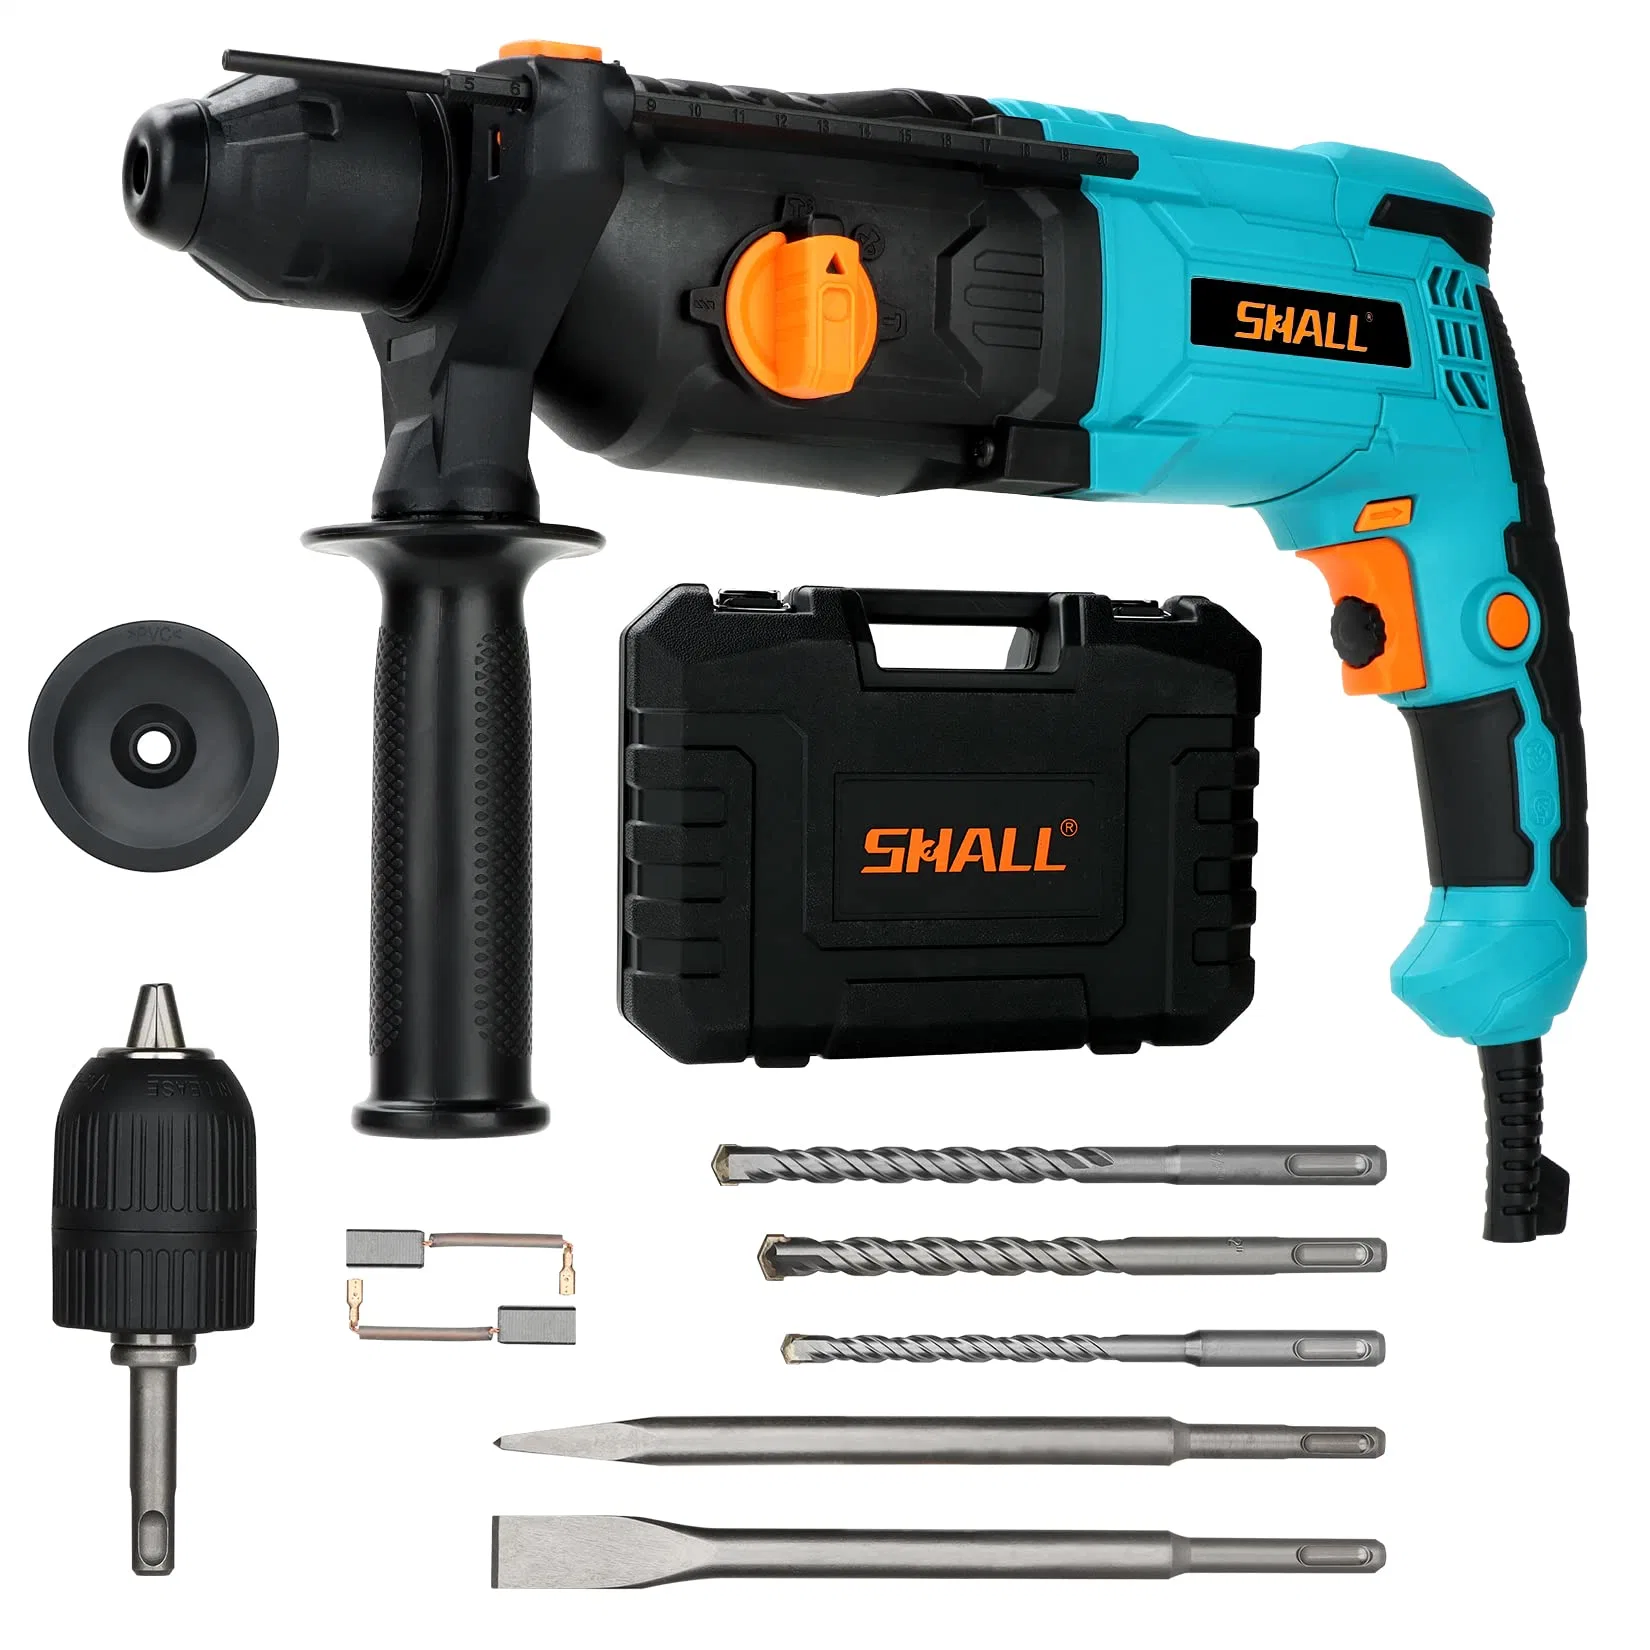 1 Inch SDS Plus Heavy Duty Rotary Hammer Drill, 7.5 AMP Demolition Hammer, One Knob 4 Functions with Speed Adjustment